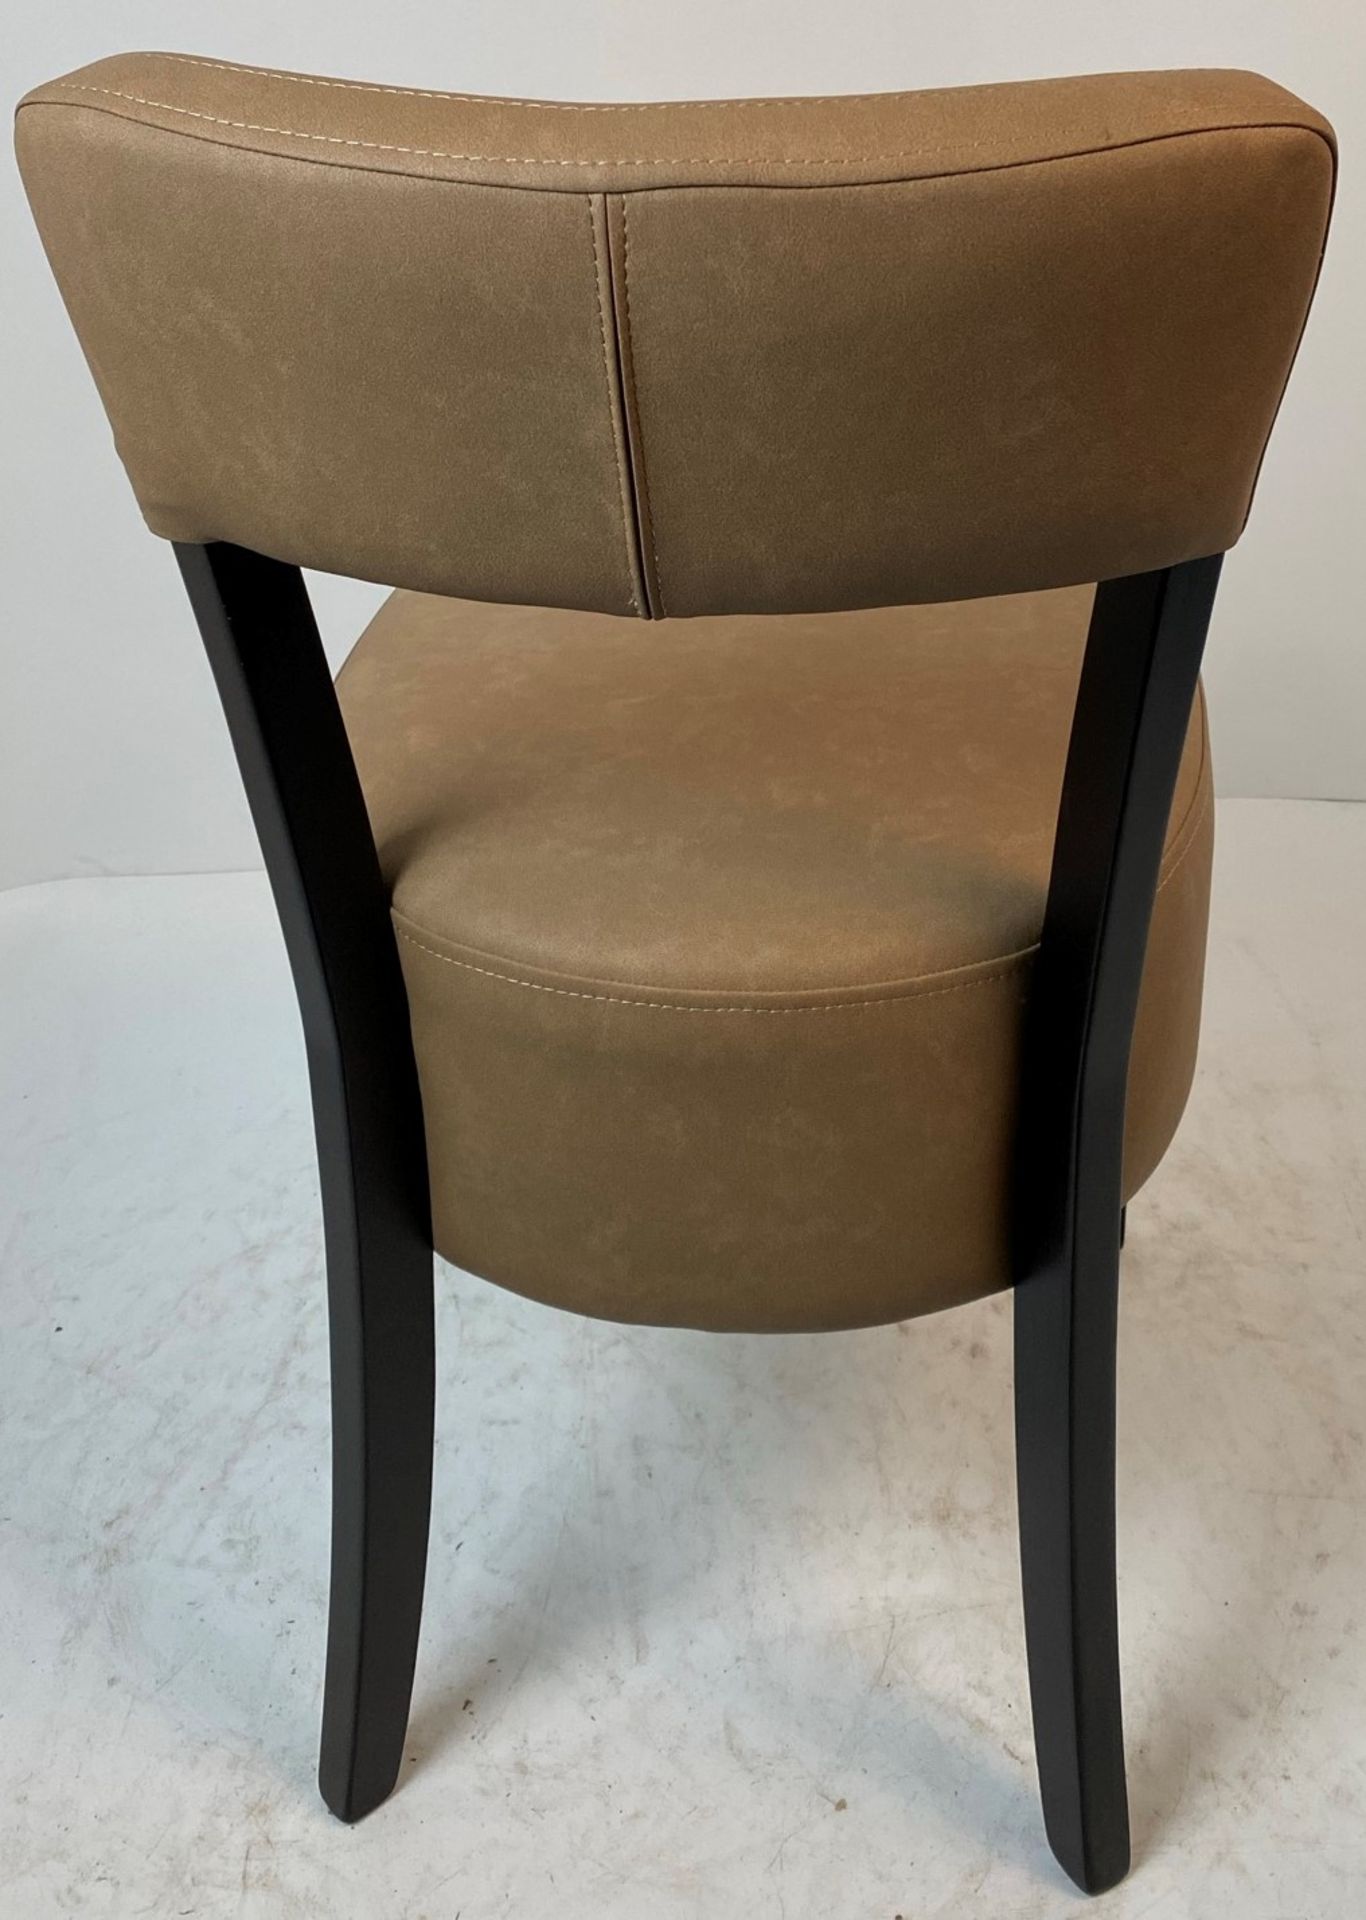 A Memphis Half Back Covertex Infiniti Caramel INF1847 side/dining chair with Wenge coloured frame - Image 3 of 4